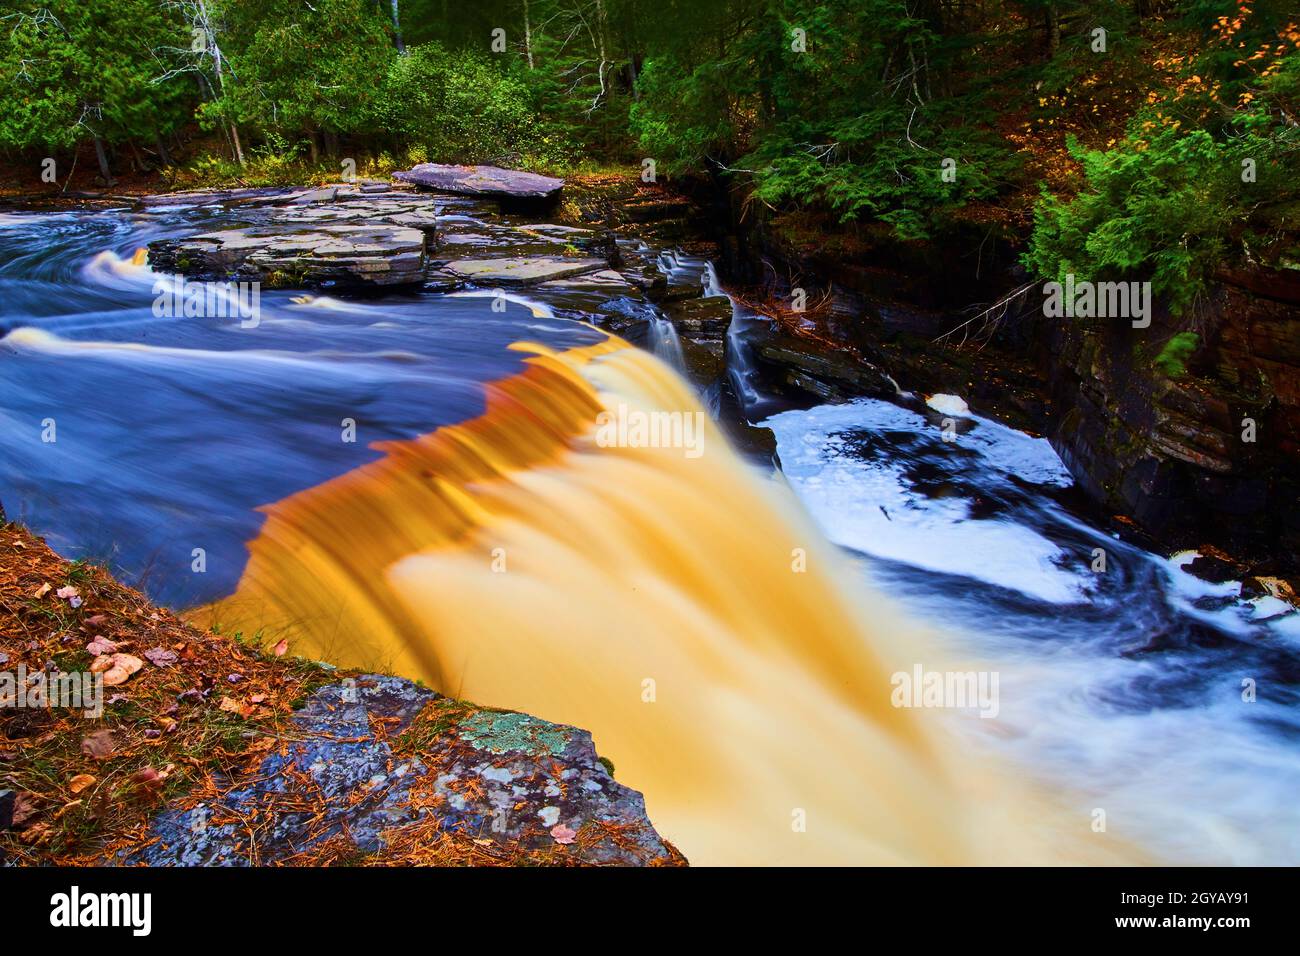 Running water in river leads to brown and gold waterfall with swirling pool at base in rocky are with pine needles and green forest Stock Photo